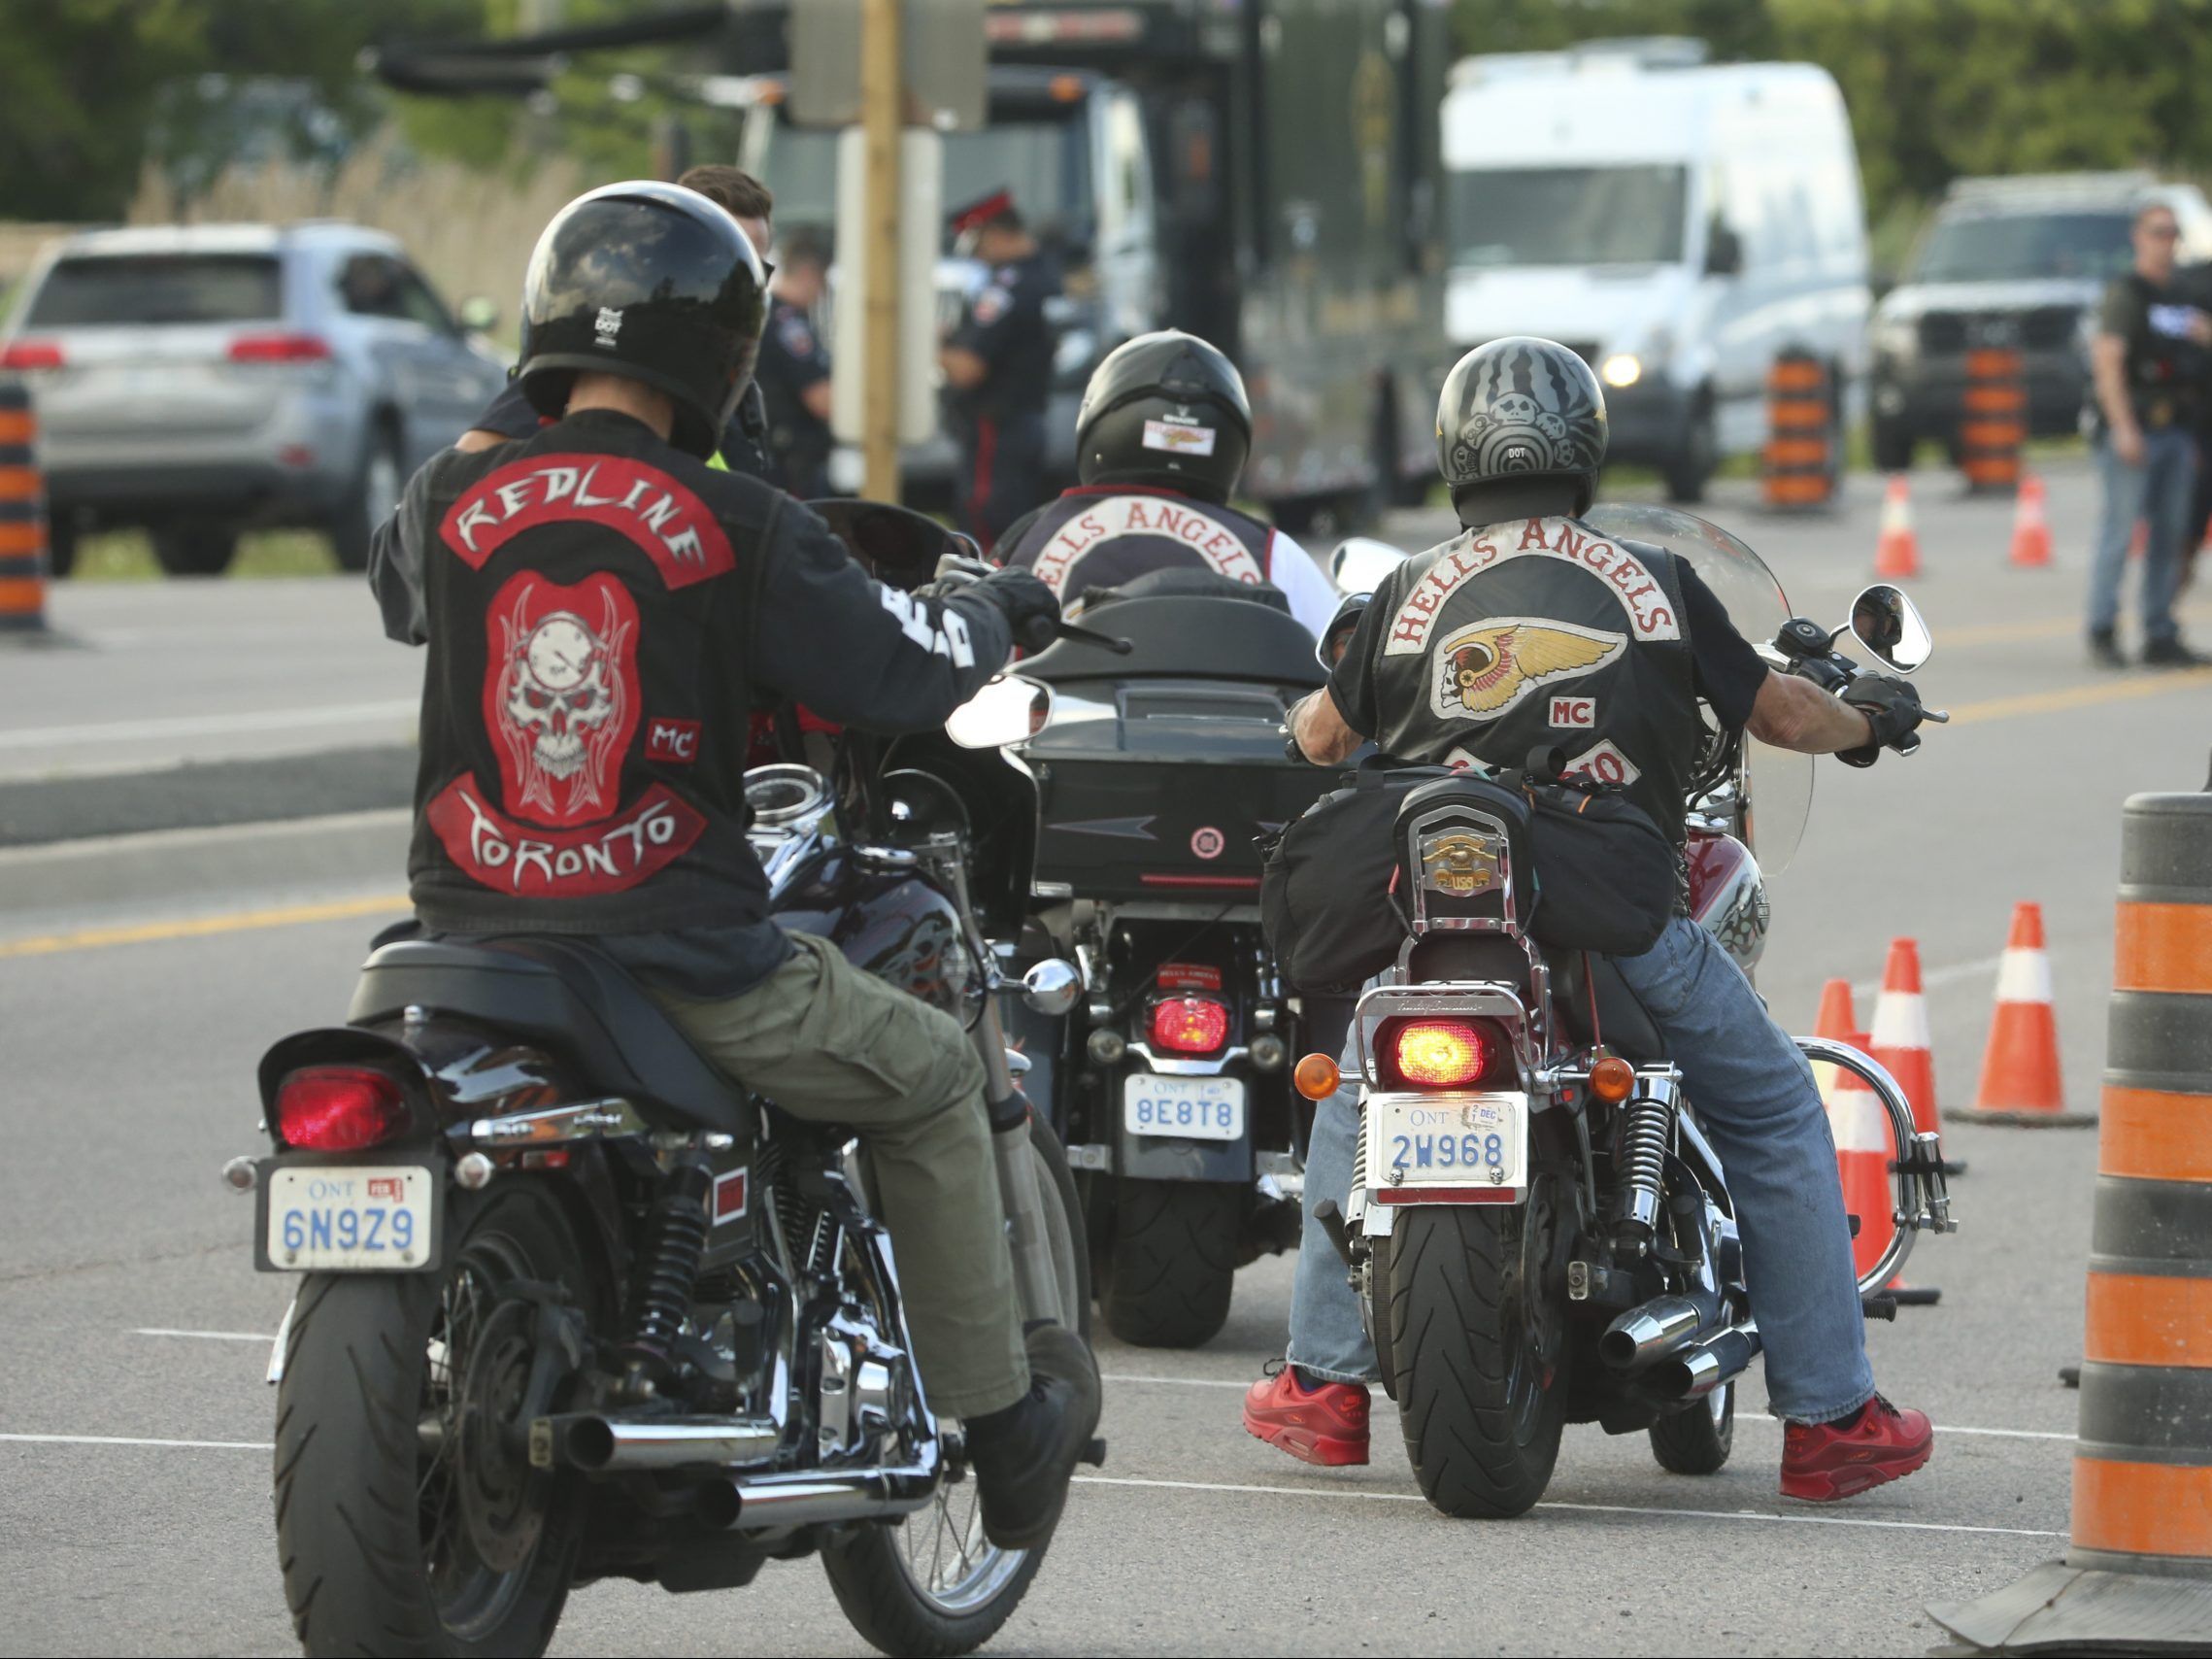 No major incidents during Hell's Angels event in Brooklin: Cops ...